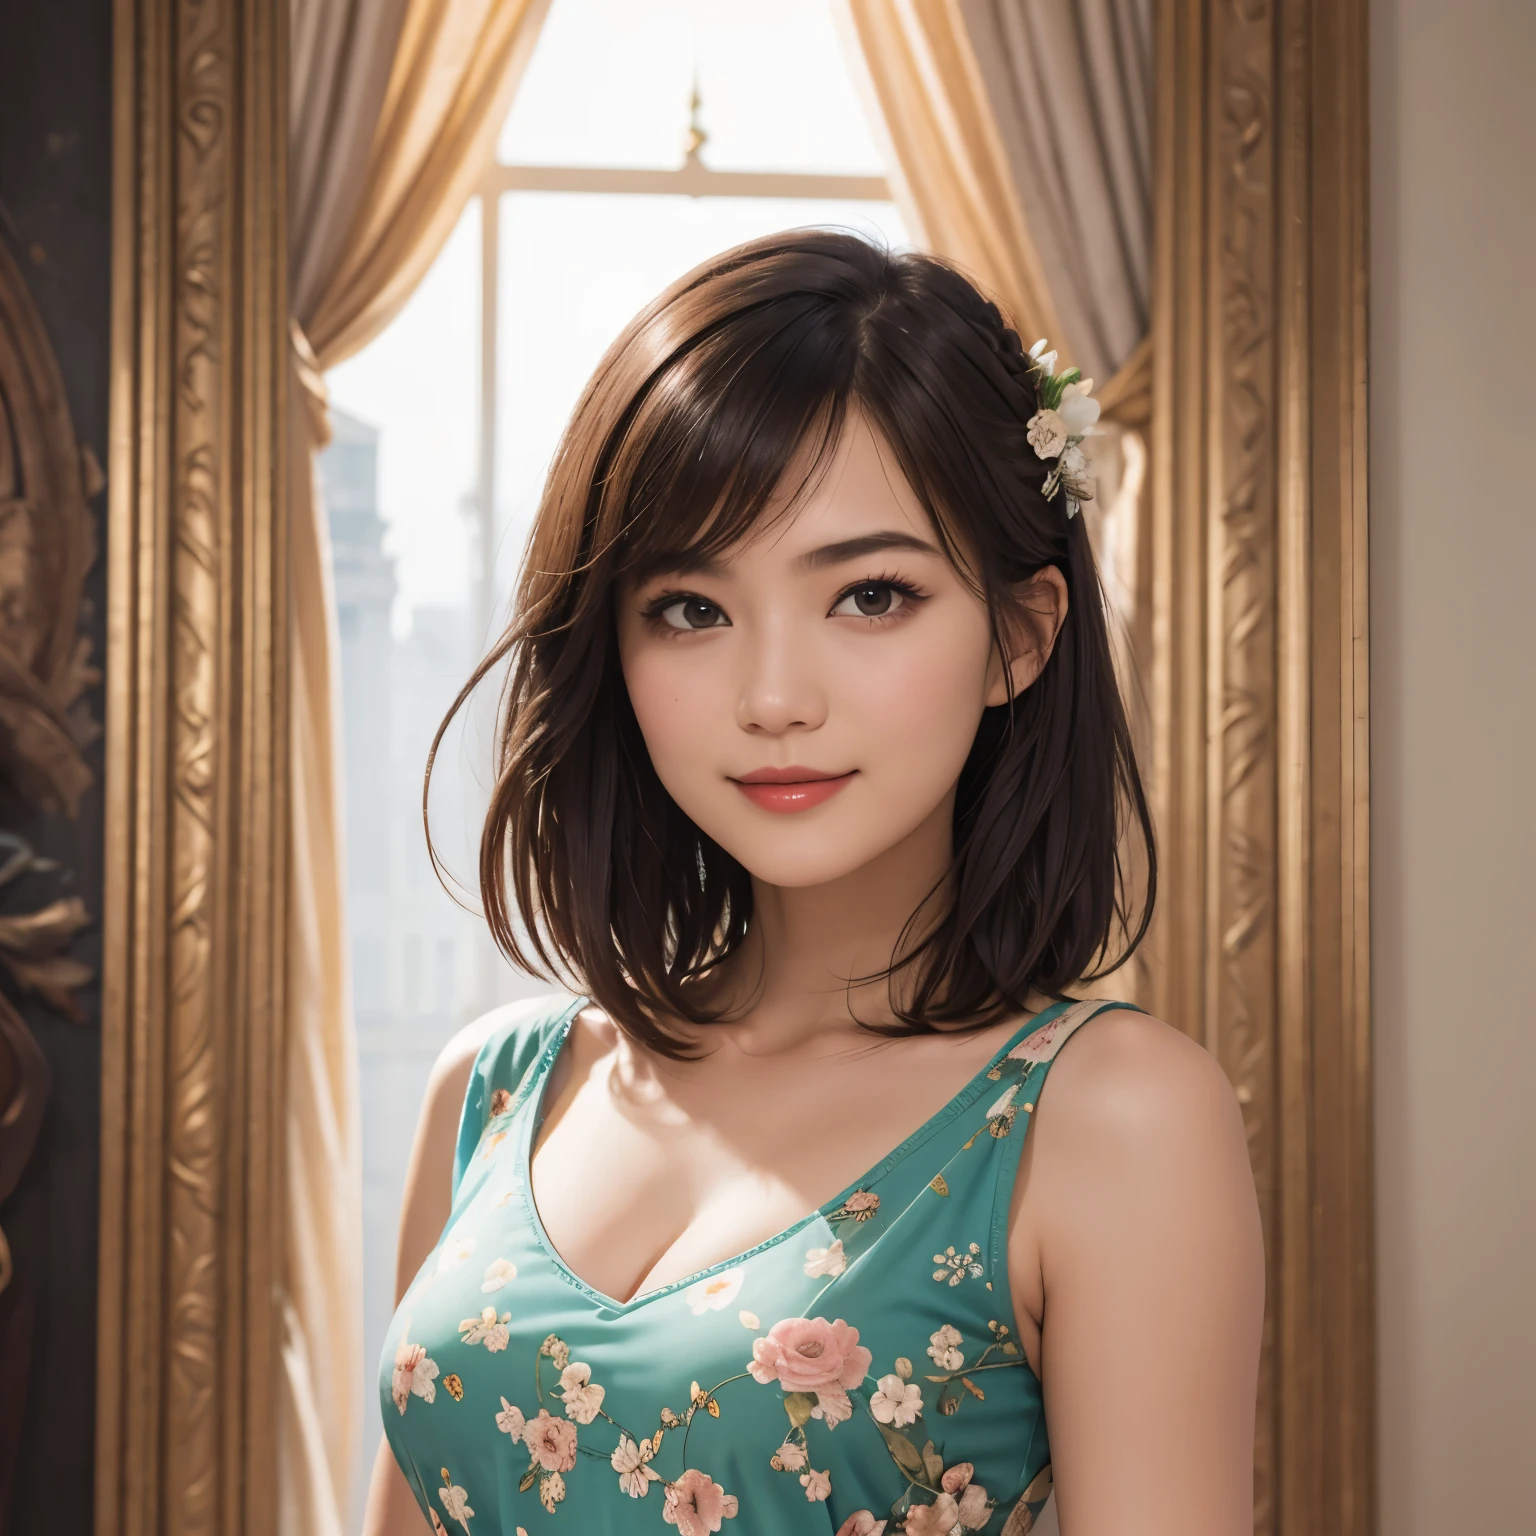 141
(a 20 yo woman,in the palace), (A hyper-realistic), (high-level image quality), ((beautiful hairstyle 46)), ((short-hair:1.46)), (kindly smile), (breasted:1.1), (lipsticks), (is wearing dress), (murky,wide,Luxurious room), (florals), (an oil painting、Rembrandt)